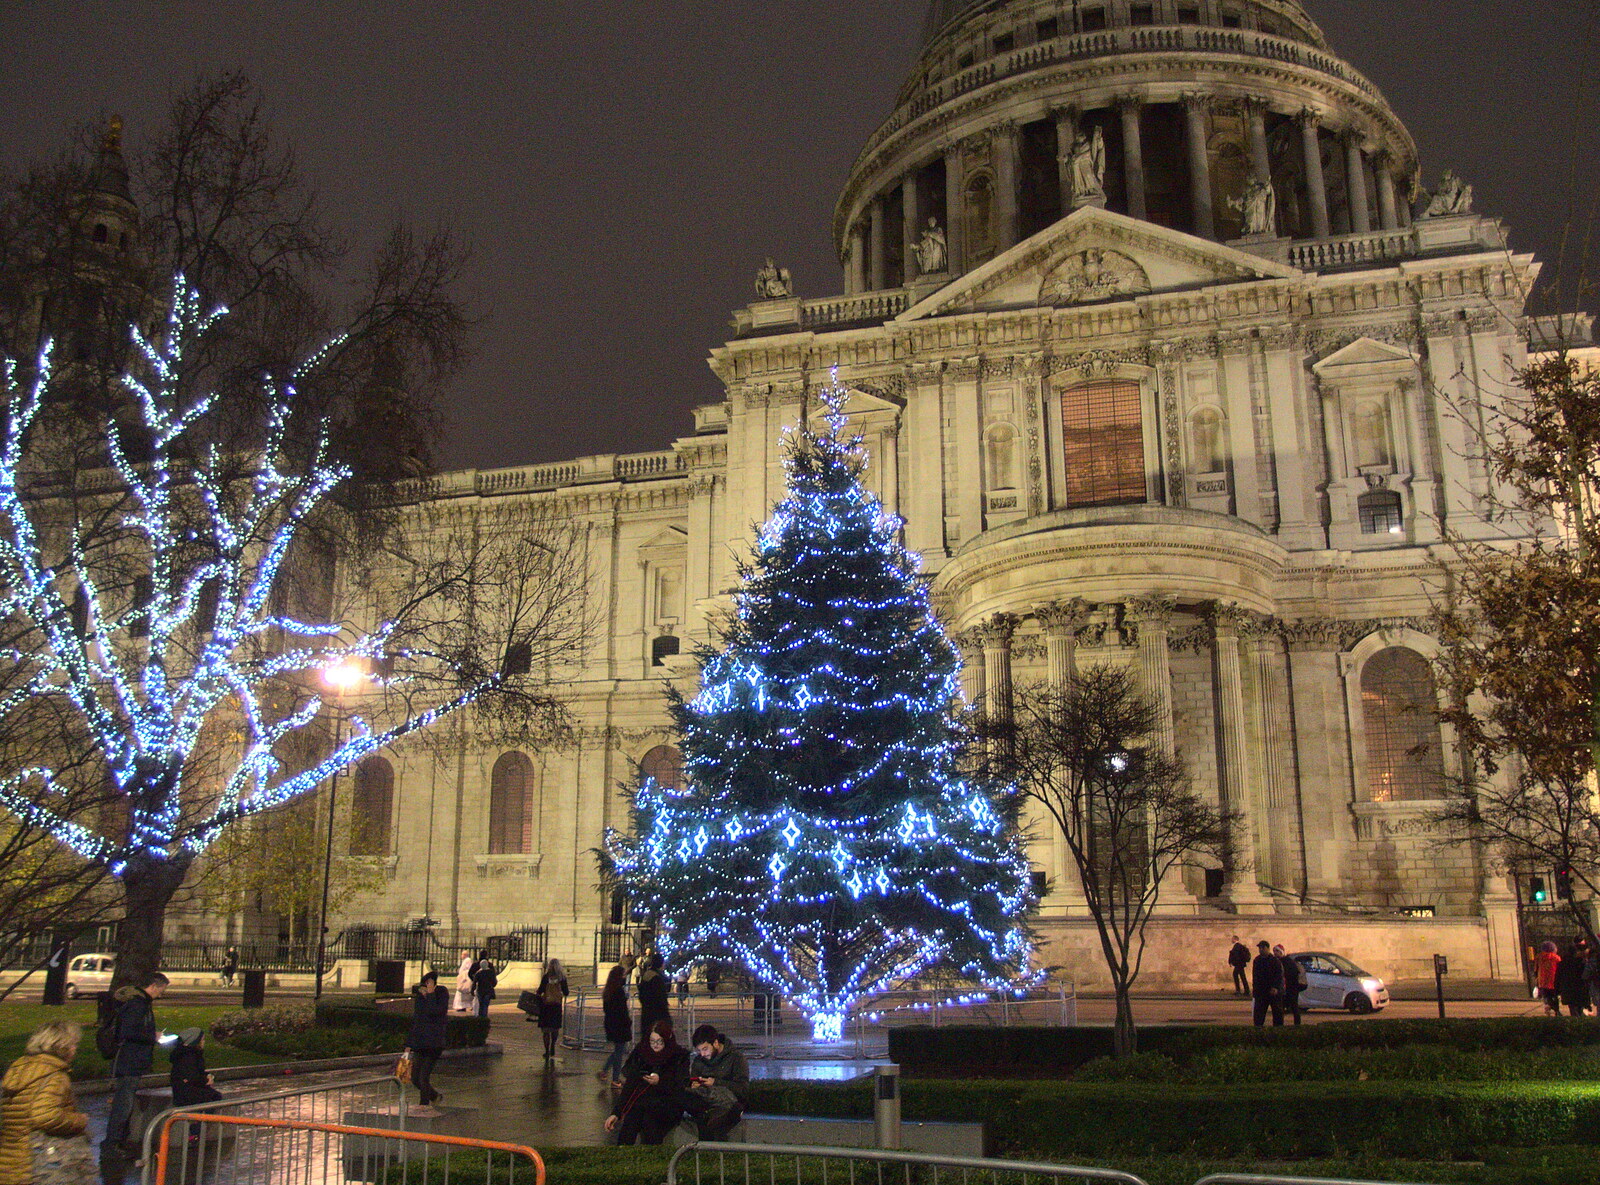 Festive tree in front of St. Paul's from Innovation Week and a Walk Around the South Bank, Southwark - 8th December 2016